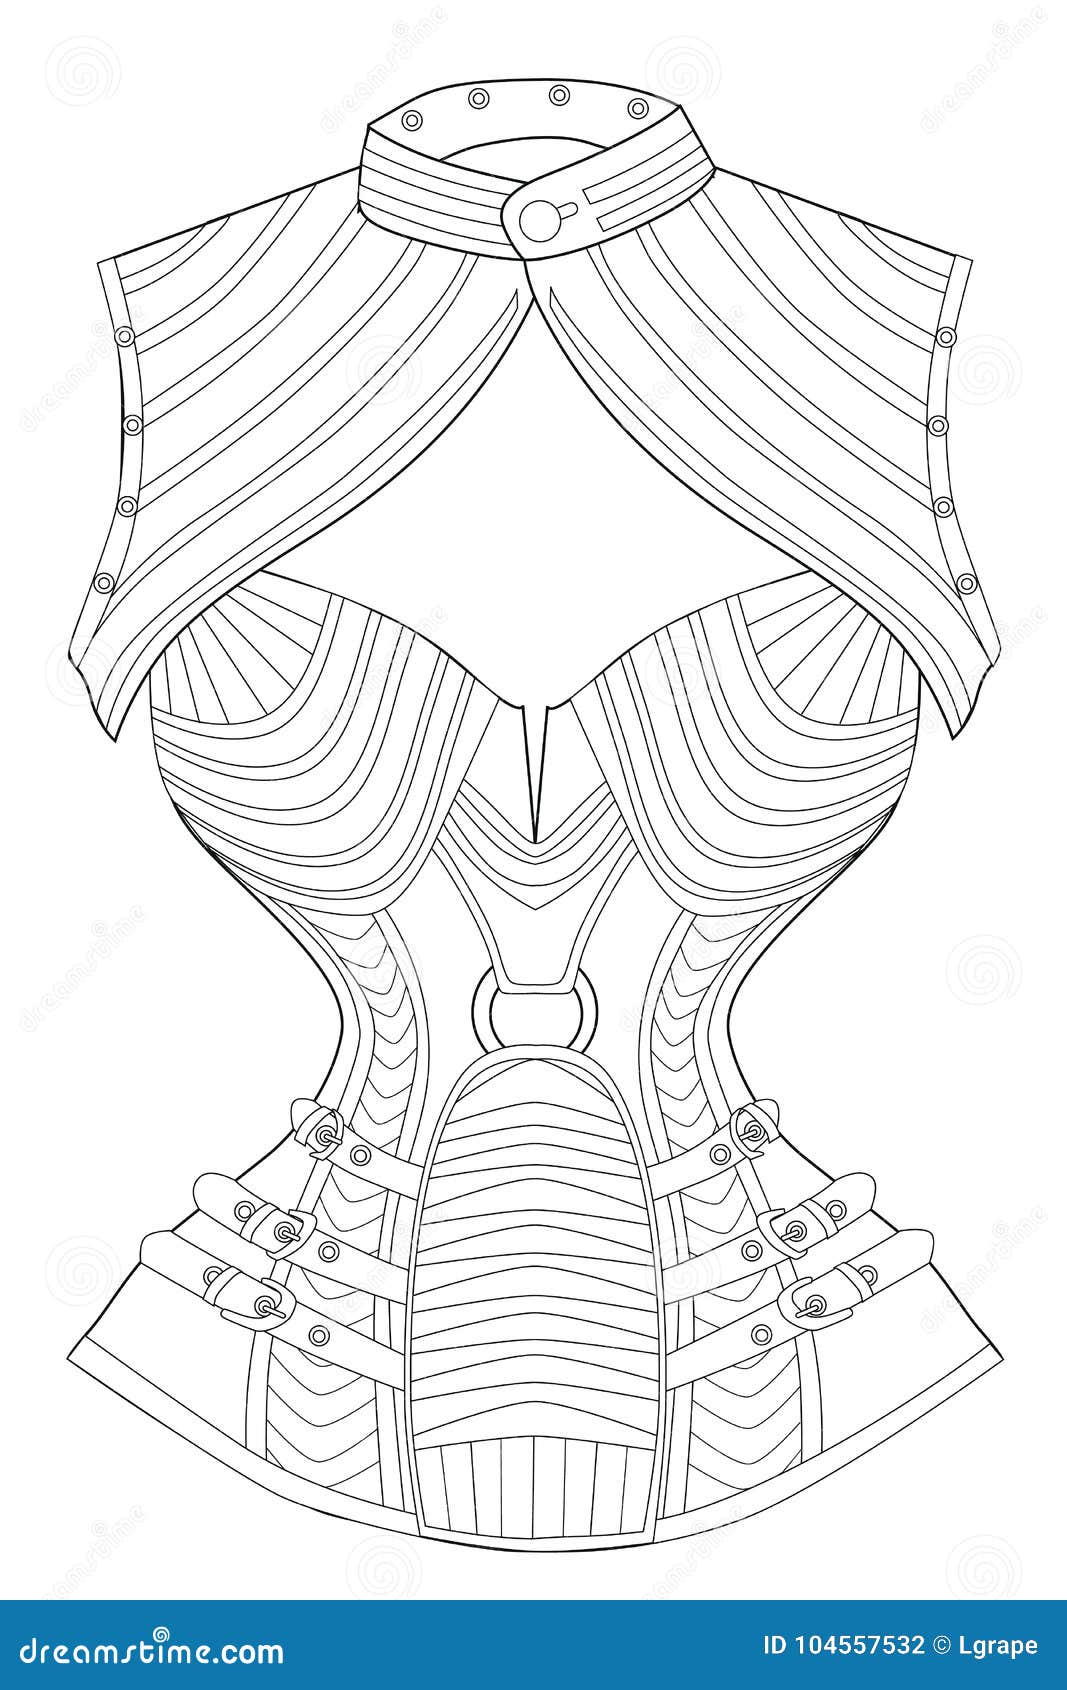 Download Coloring Page For Adults. Corset With Bolero. Stock Vector - Illustration of joint, ornament ...